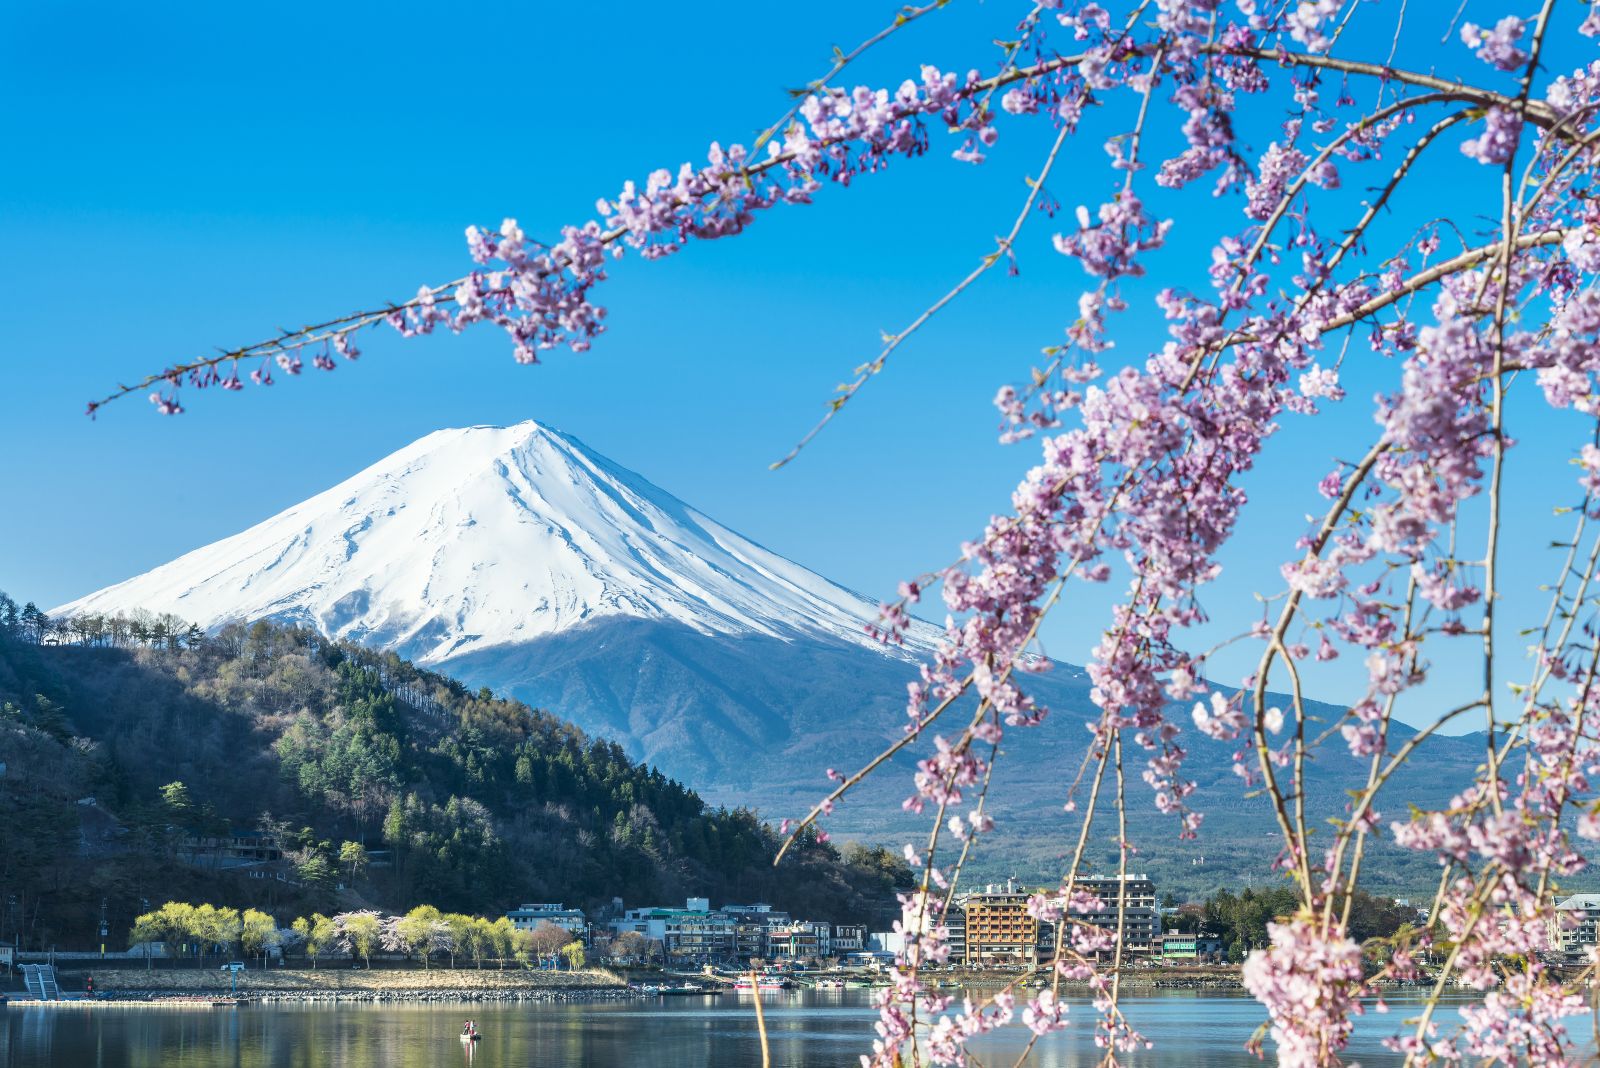 A view of snow-capped Mount Fuji with cherry blossom at Lake Kawaguchiko in the forefront